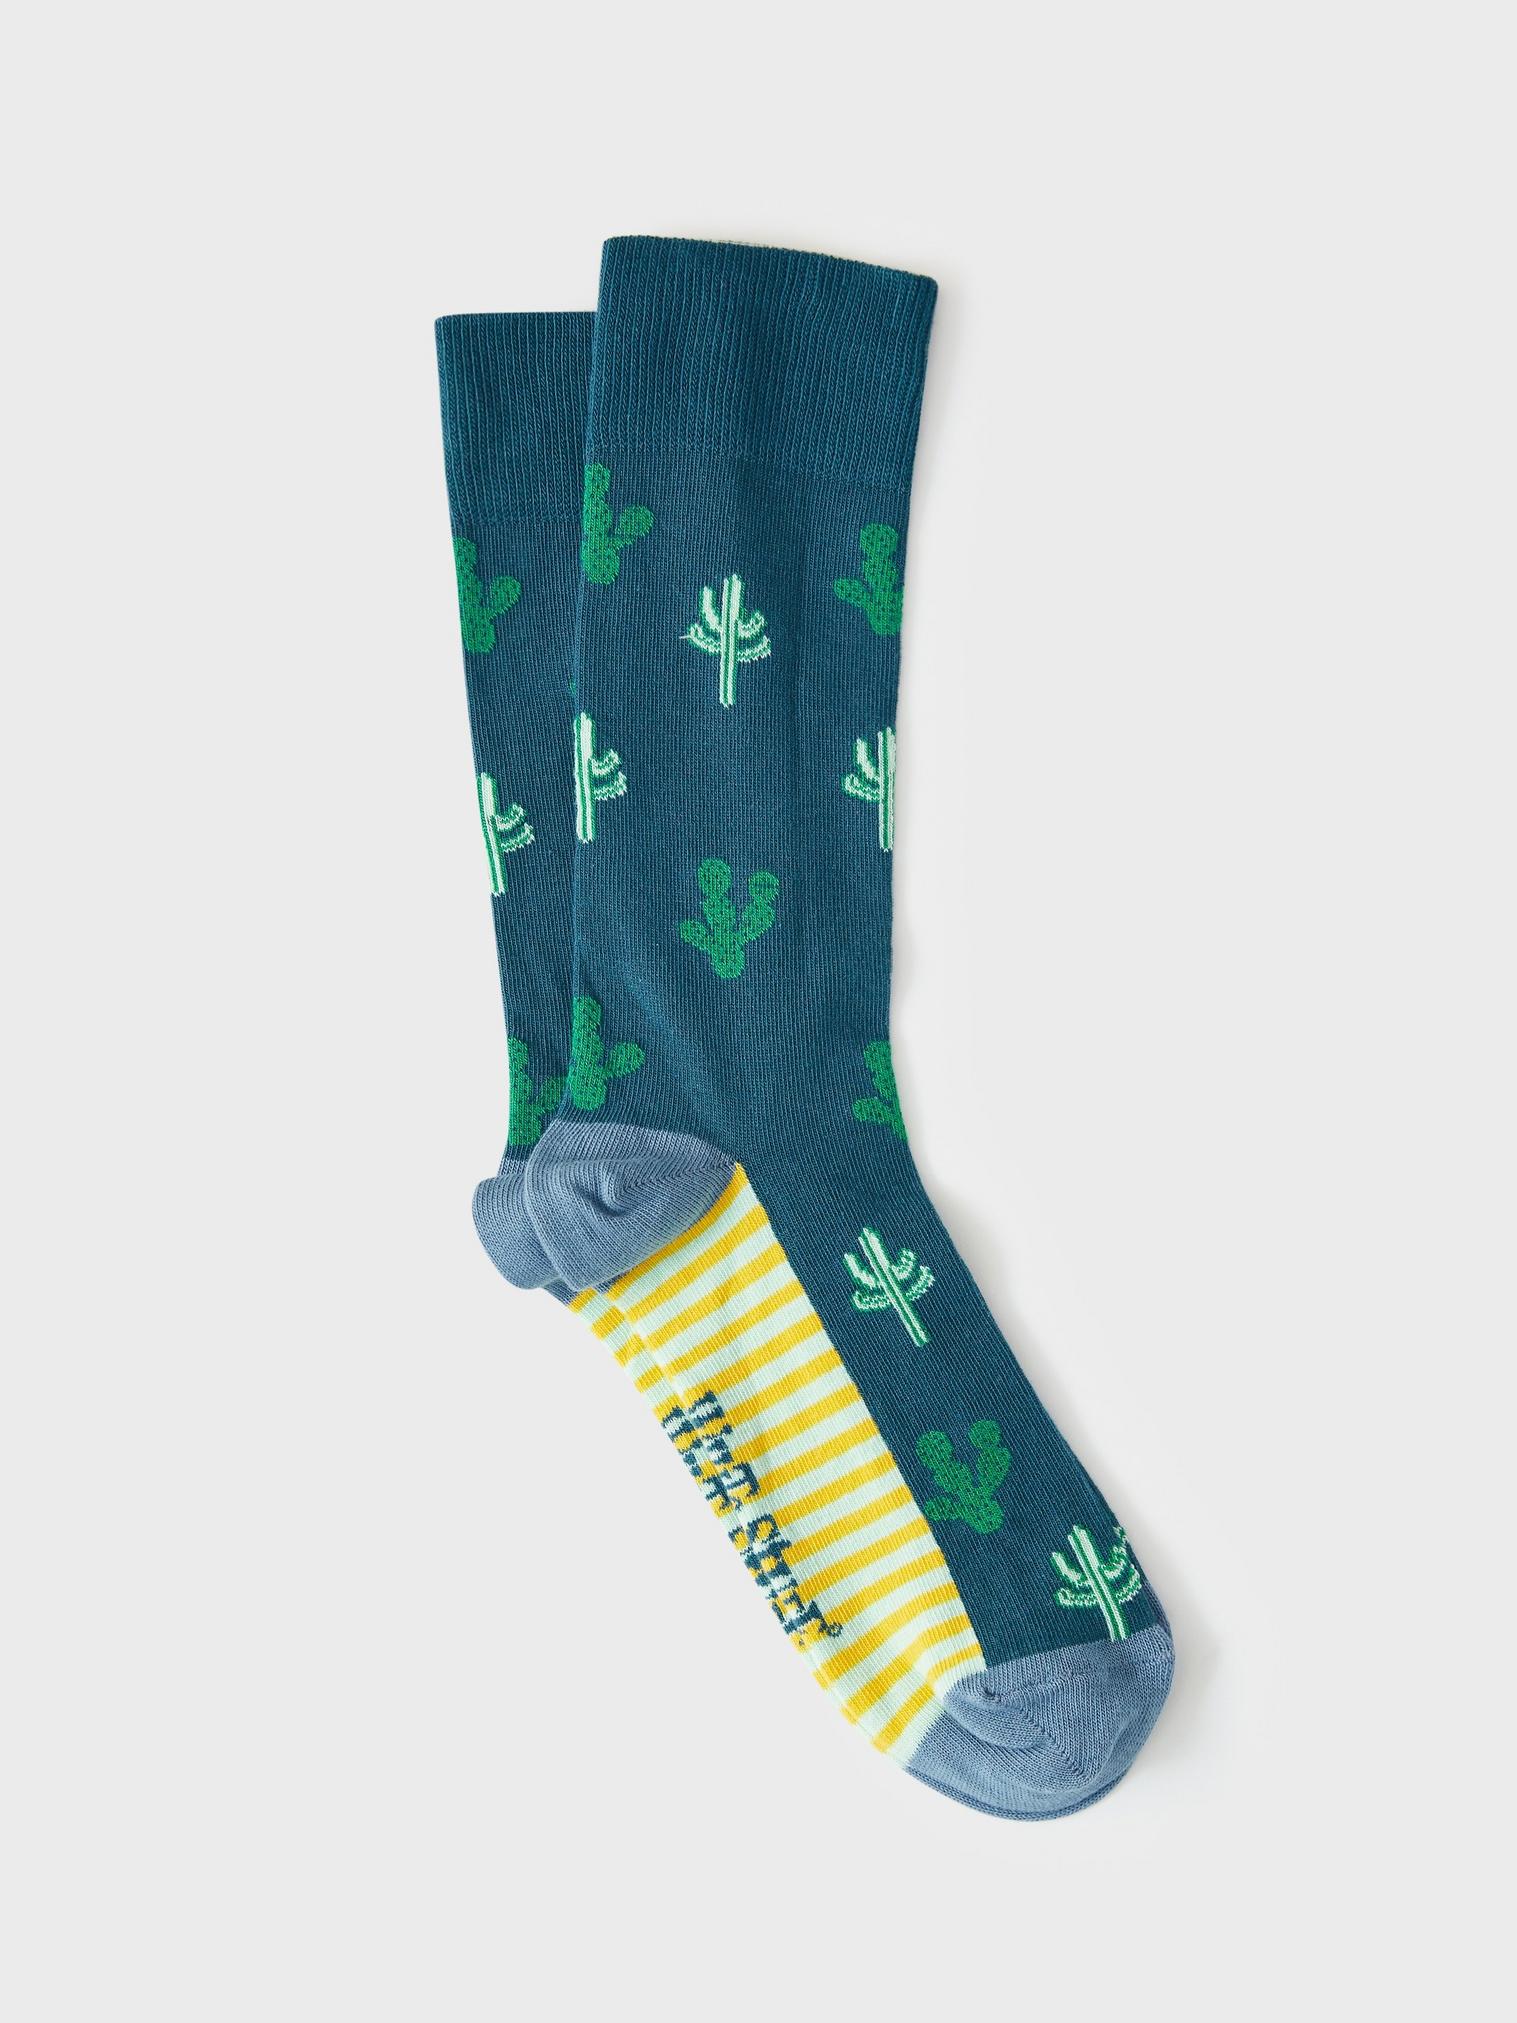 Cactus Sock in TEAL MLT - FLAT FRONT